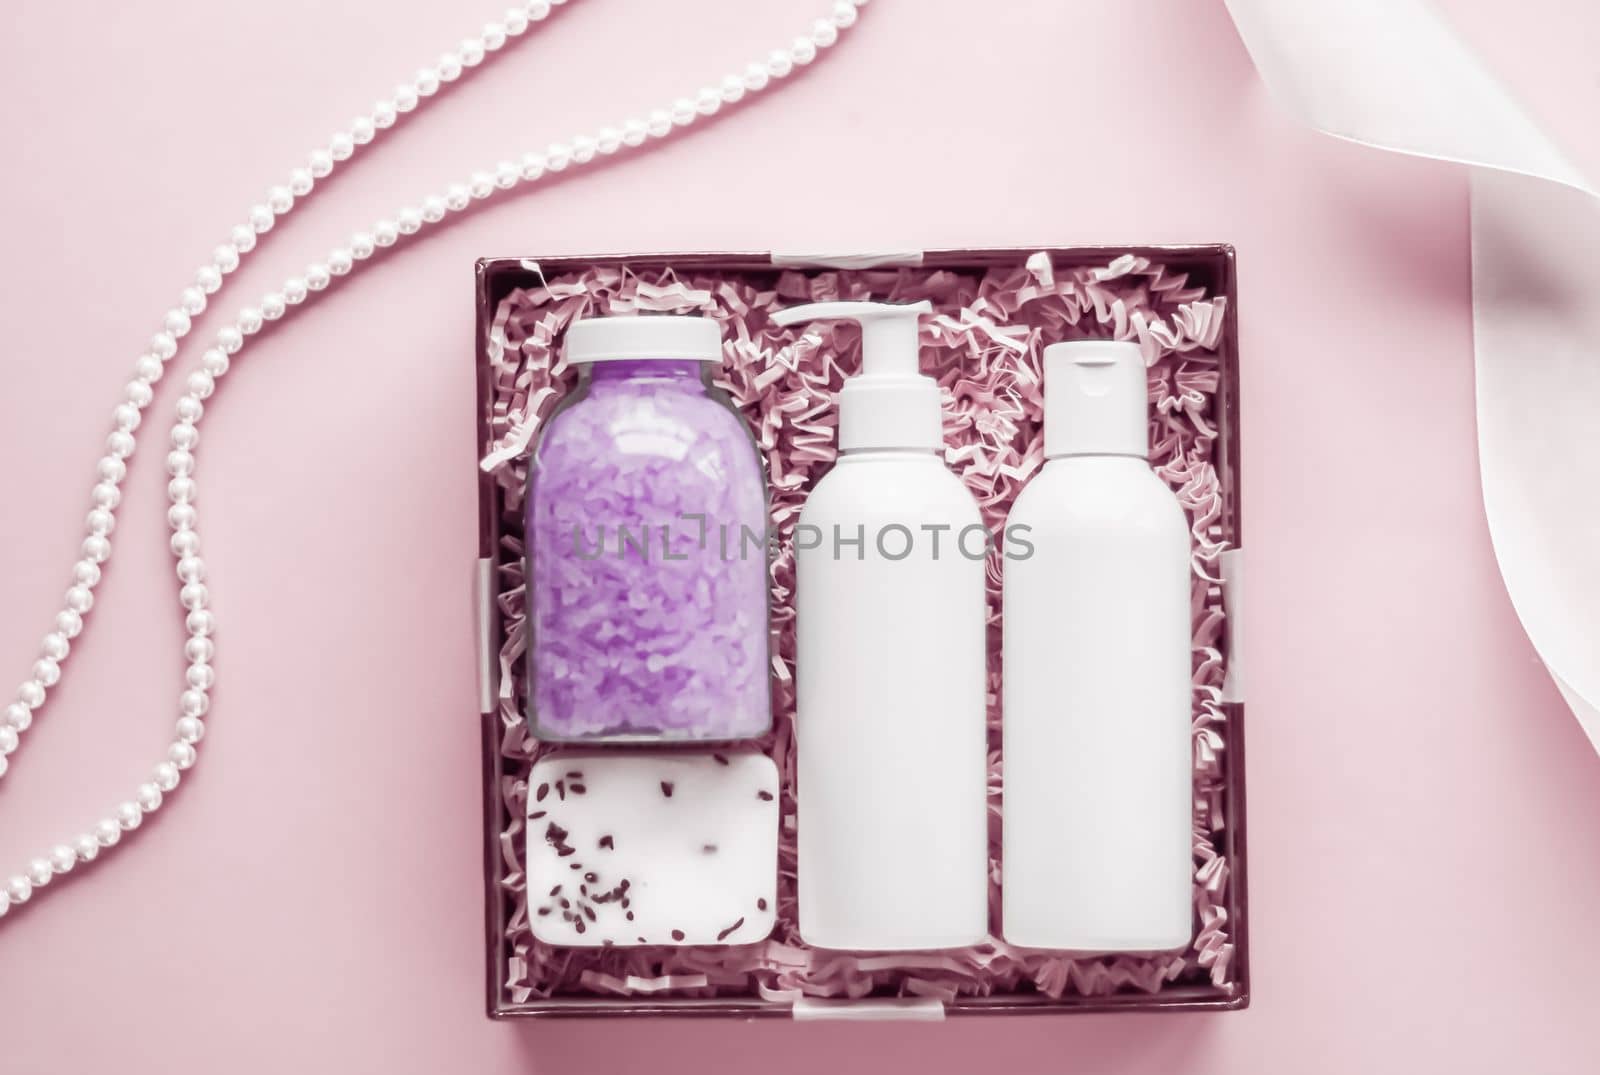 Beauty box subscription package, luxury skincare and body care products, milk lotion, bath salt, soap, shower gel as flat lay on pink background, spa cosmetics as holiday gift, online shopping delivery, flatlay by Anneleven